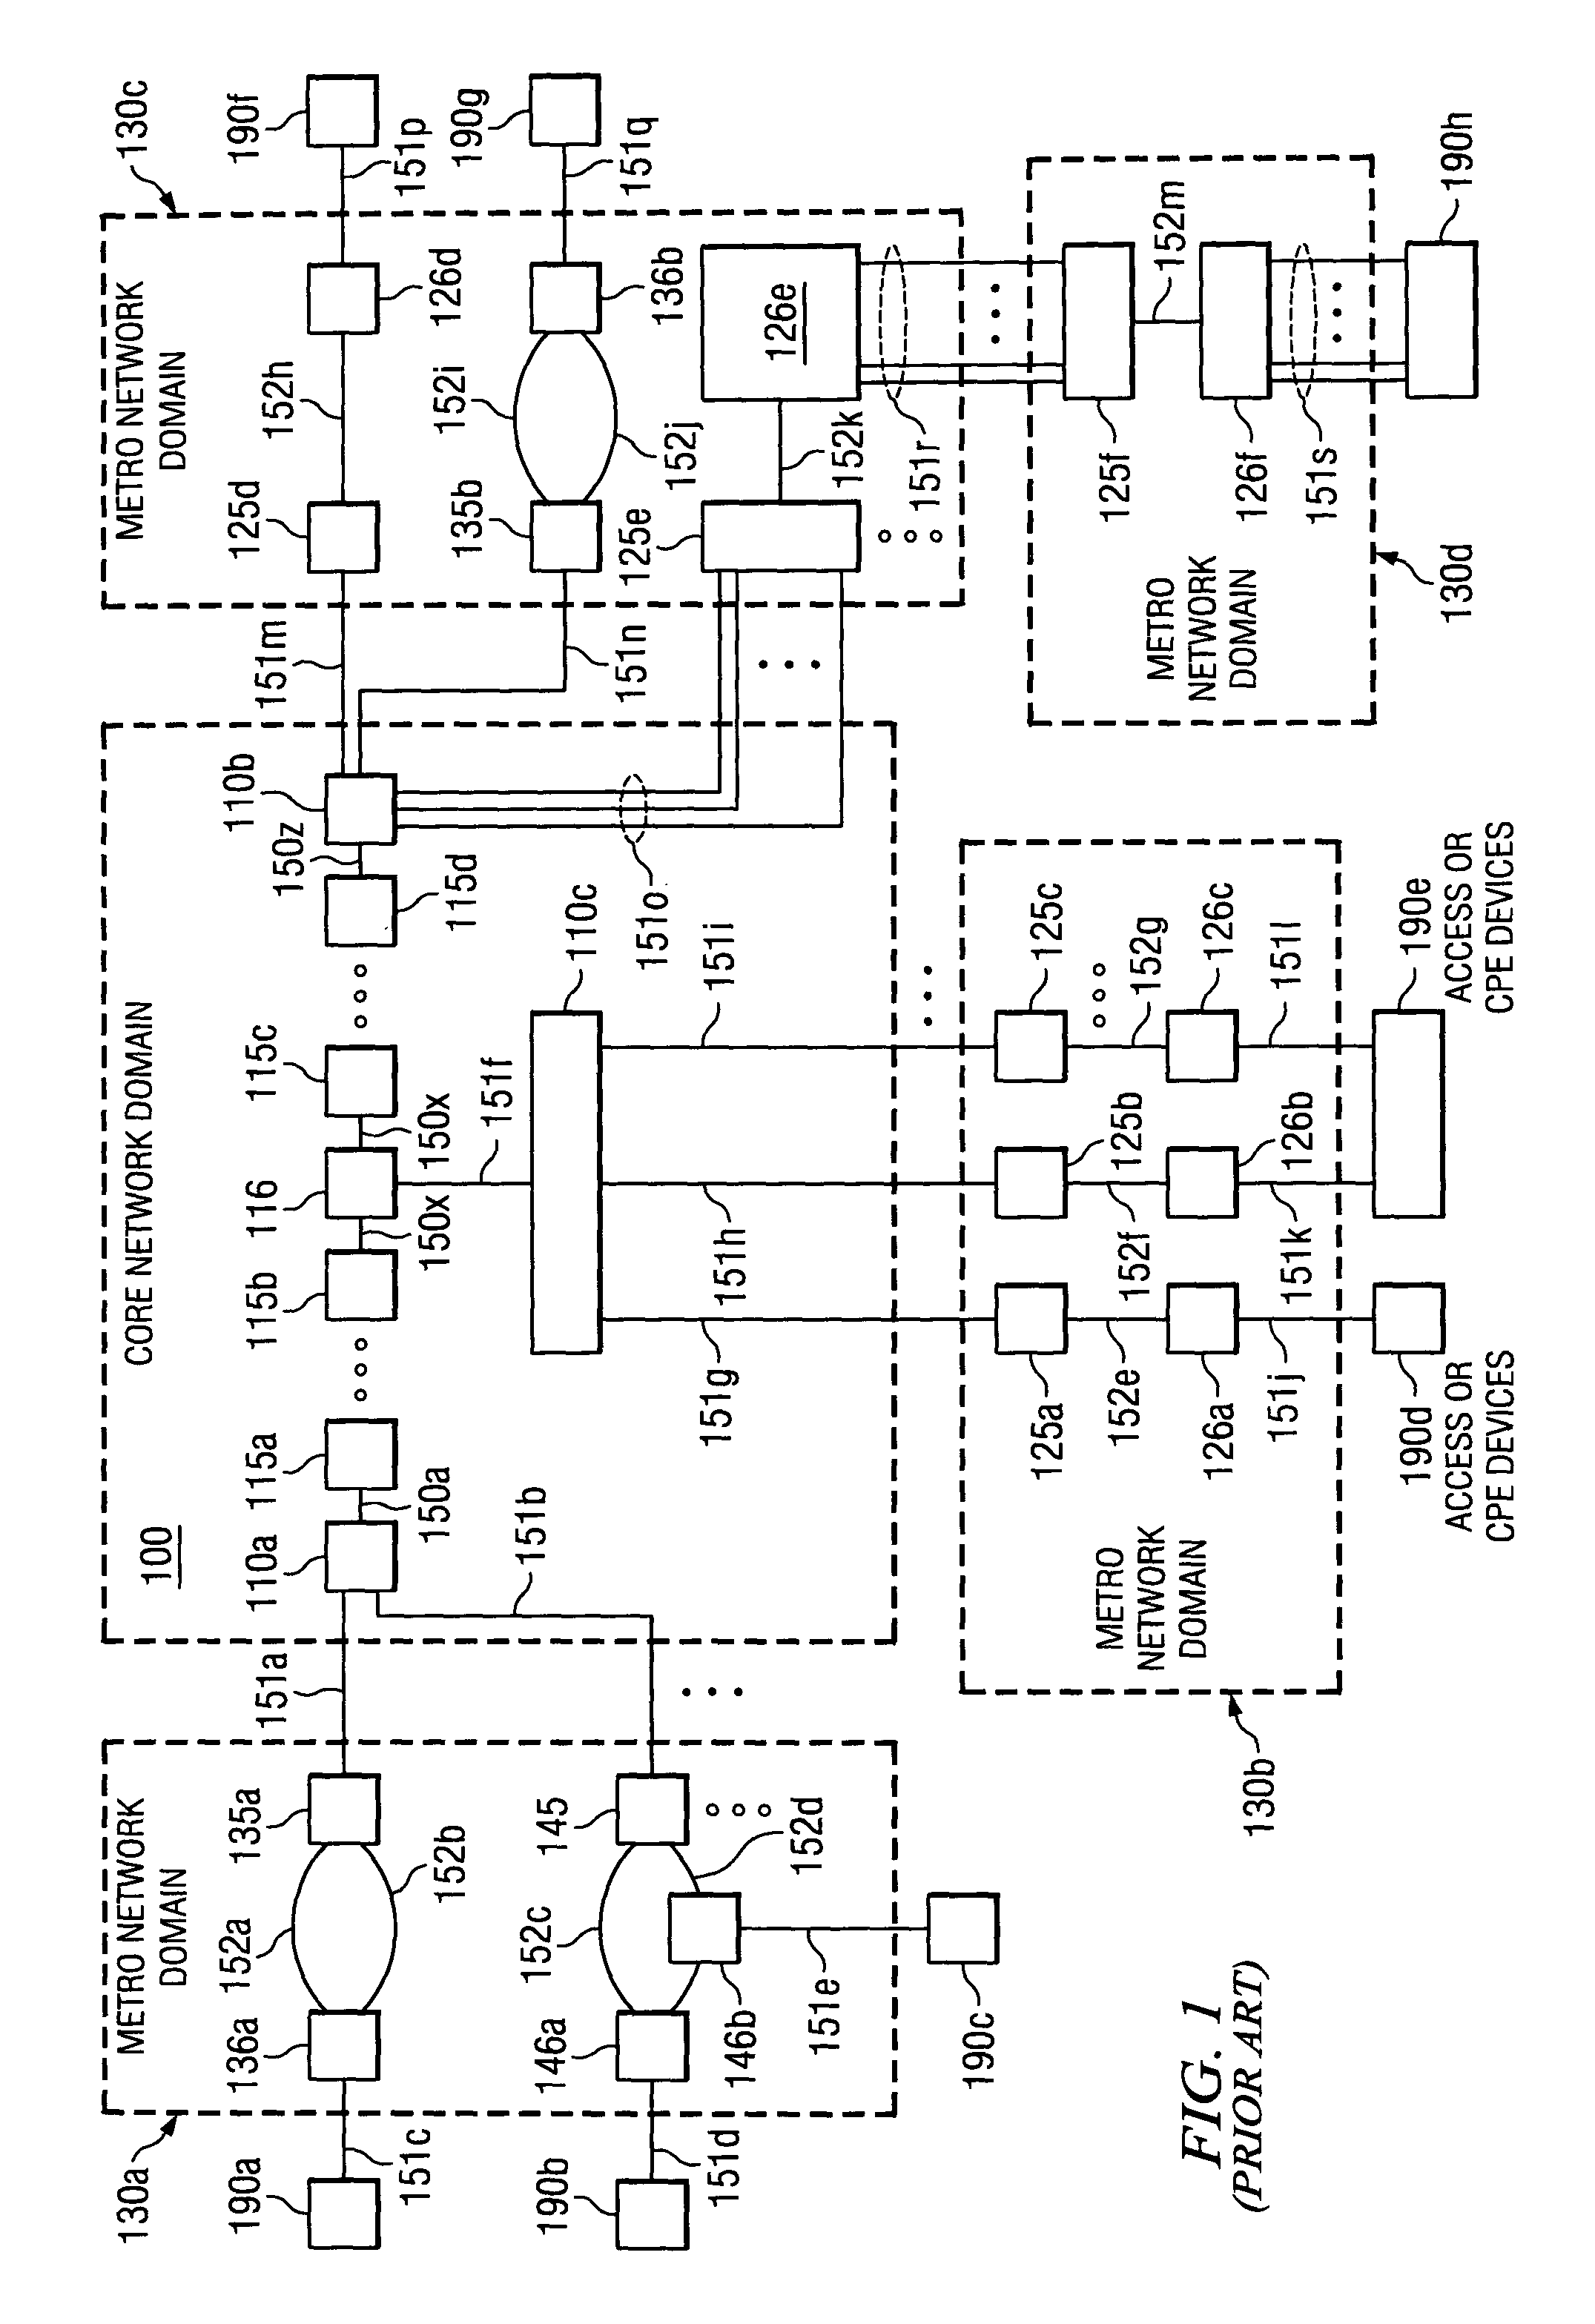 Distributed terminal optical transmission system